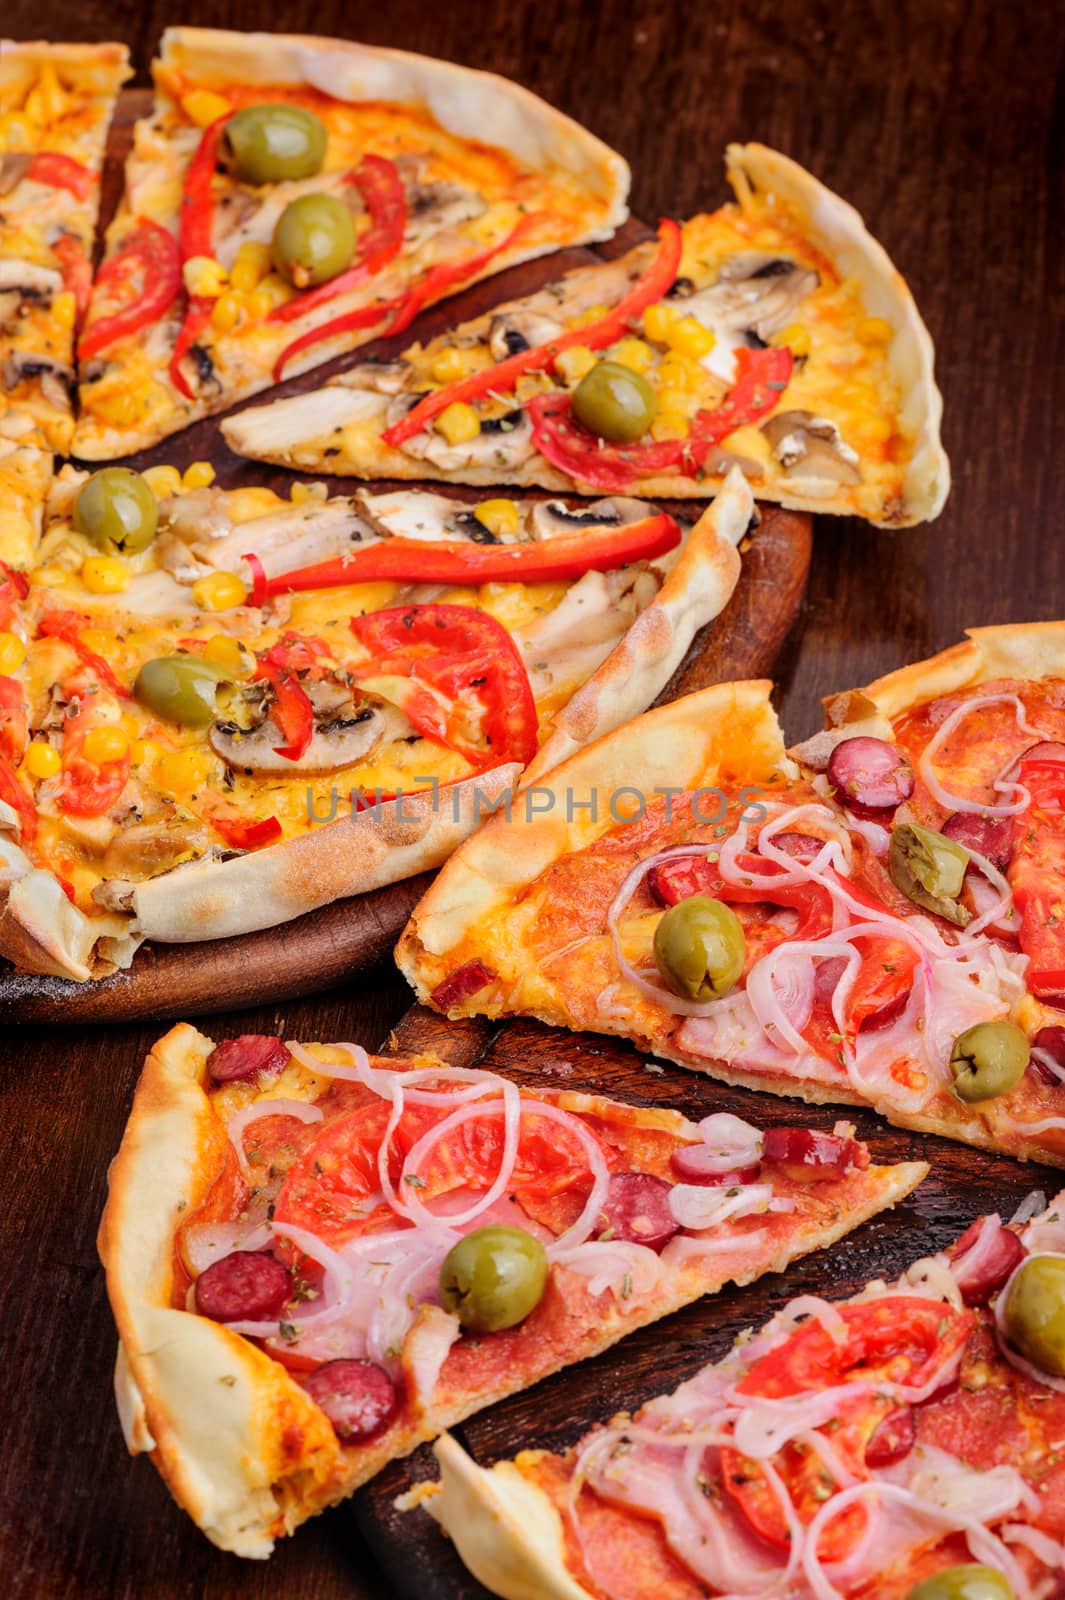 Two different pizzas with tomato, peppeeoni, olives, corn, red pepper